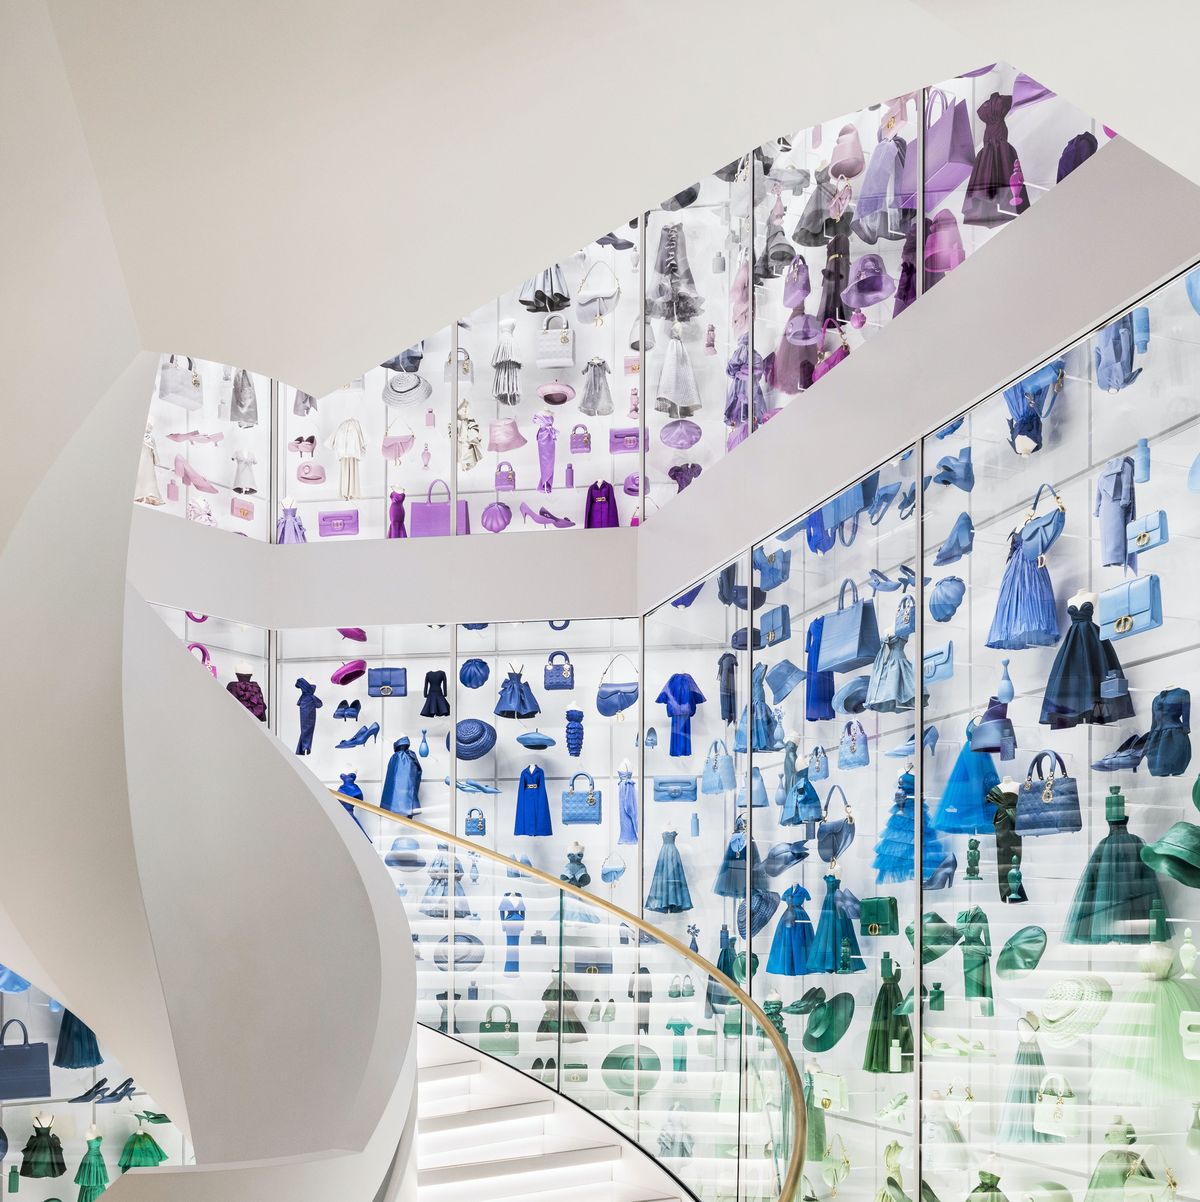 Dior Barcelona Boutique Is Designed by Star Architect Peter Marino